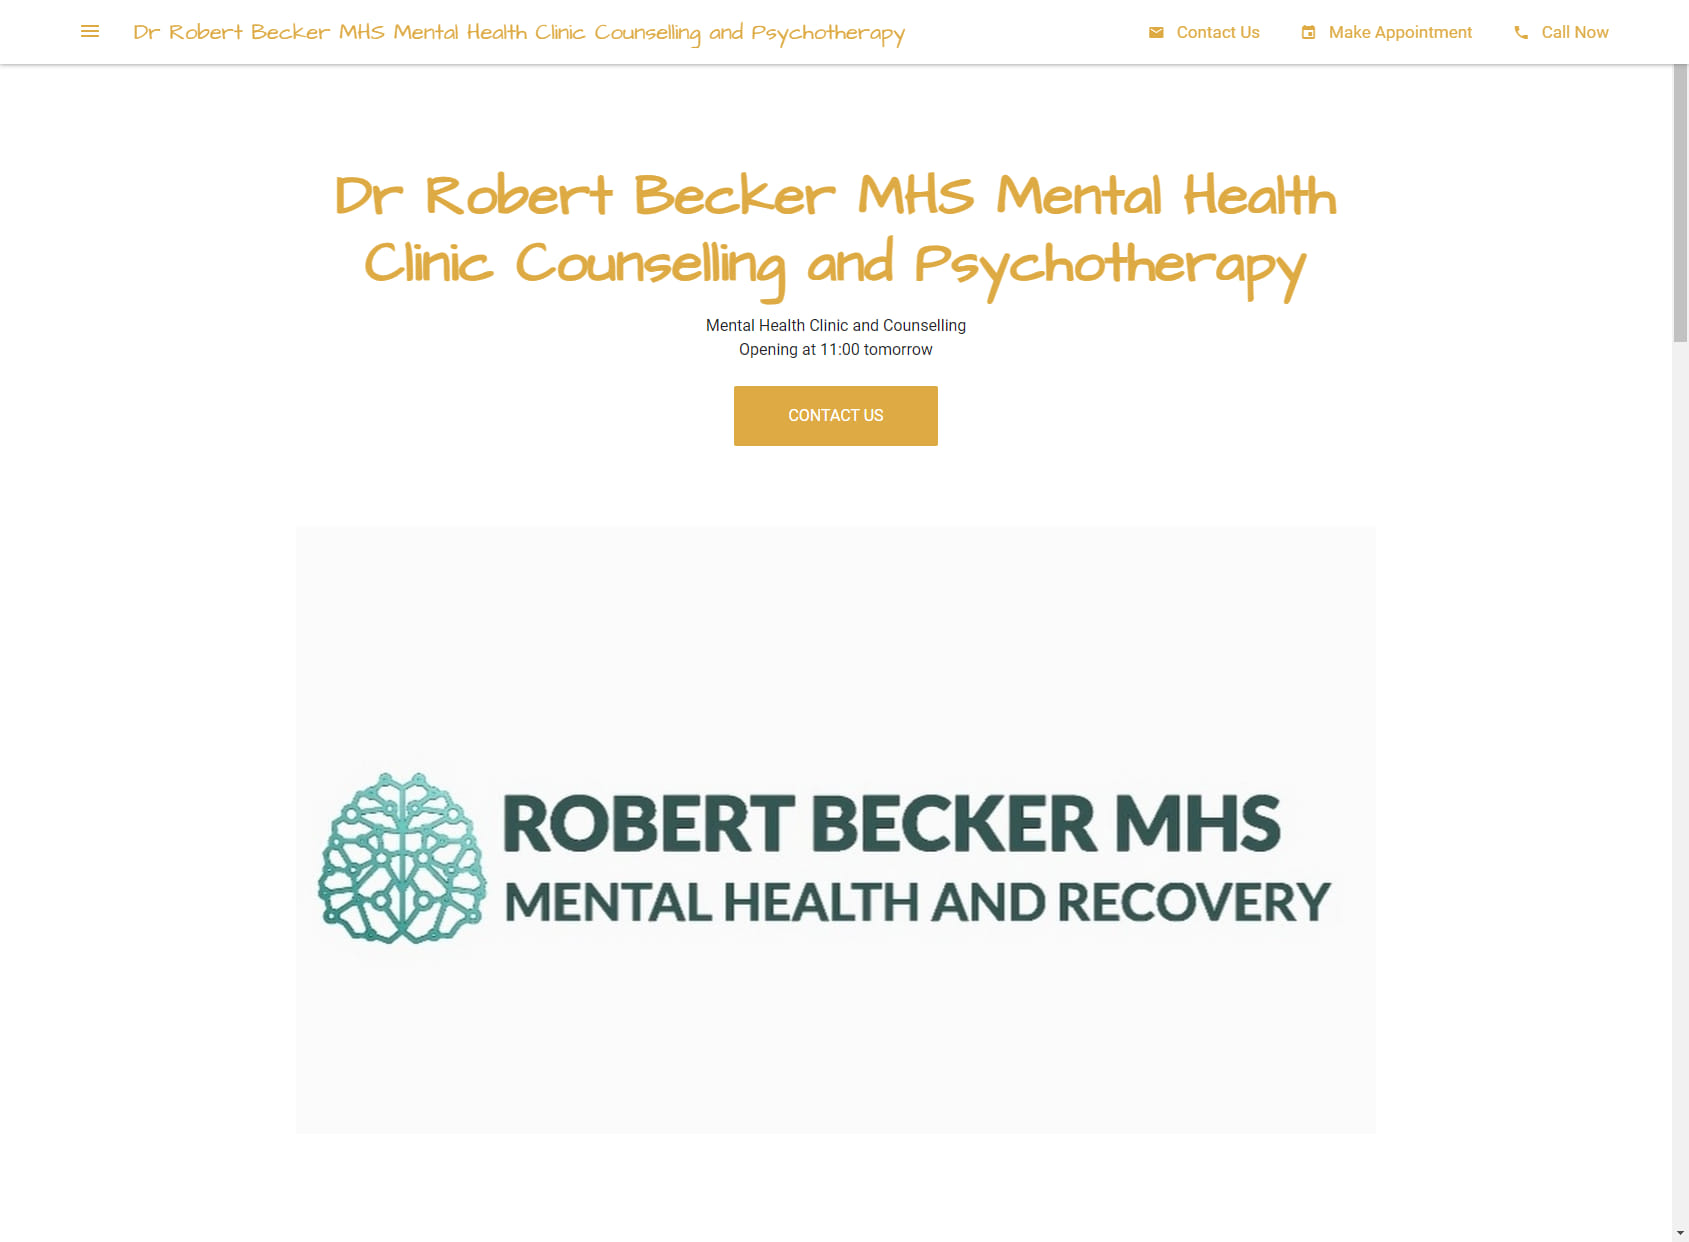 Dr Robert Becker MHS Mental Health Clinic Counselling and Psychotherapy